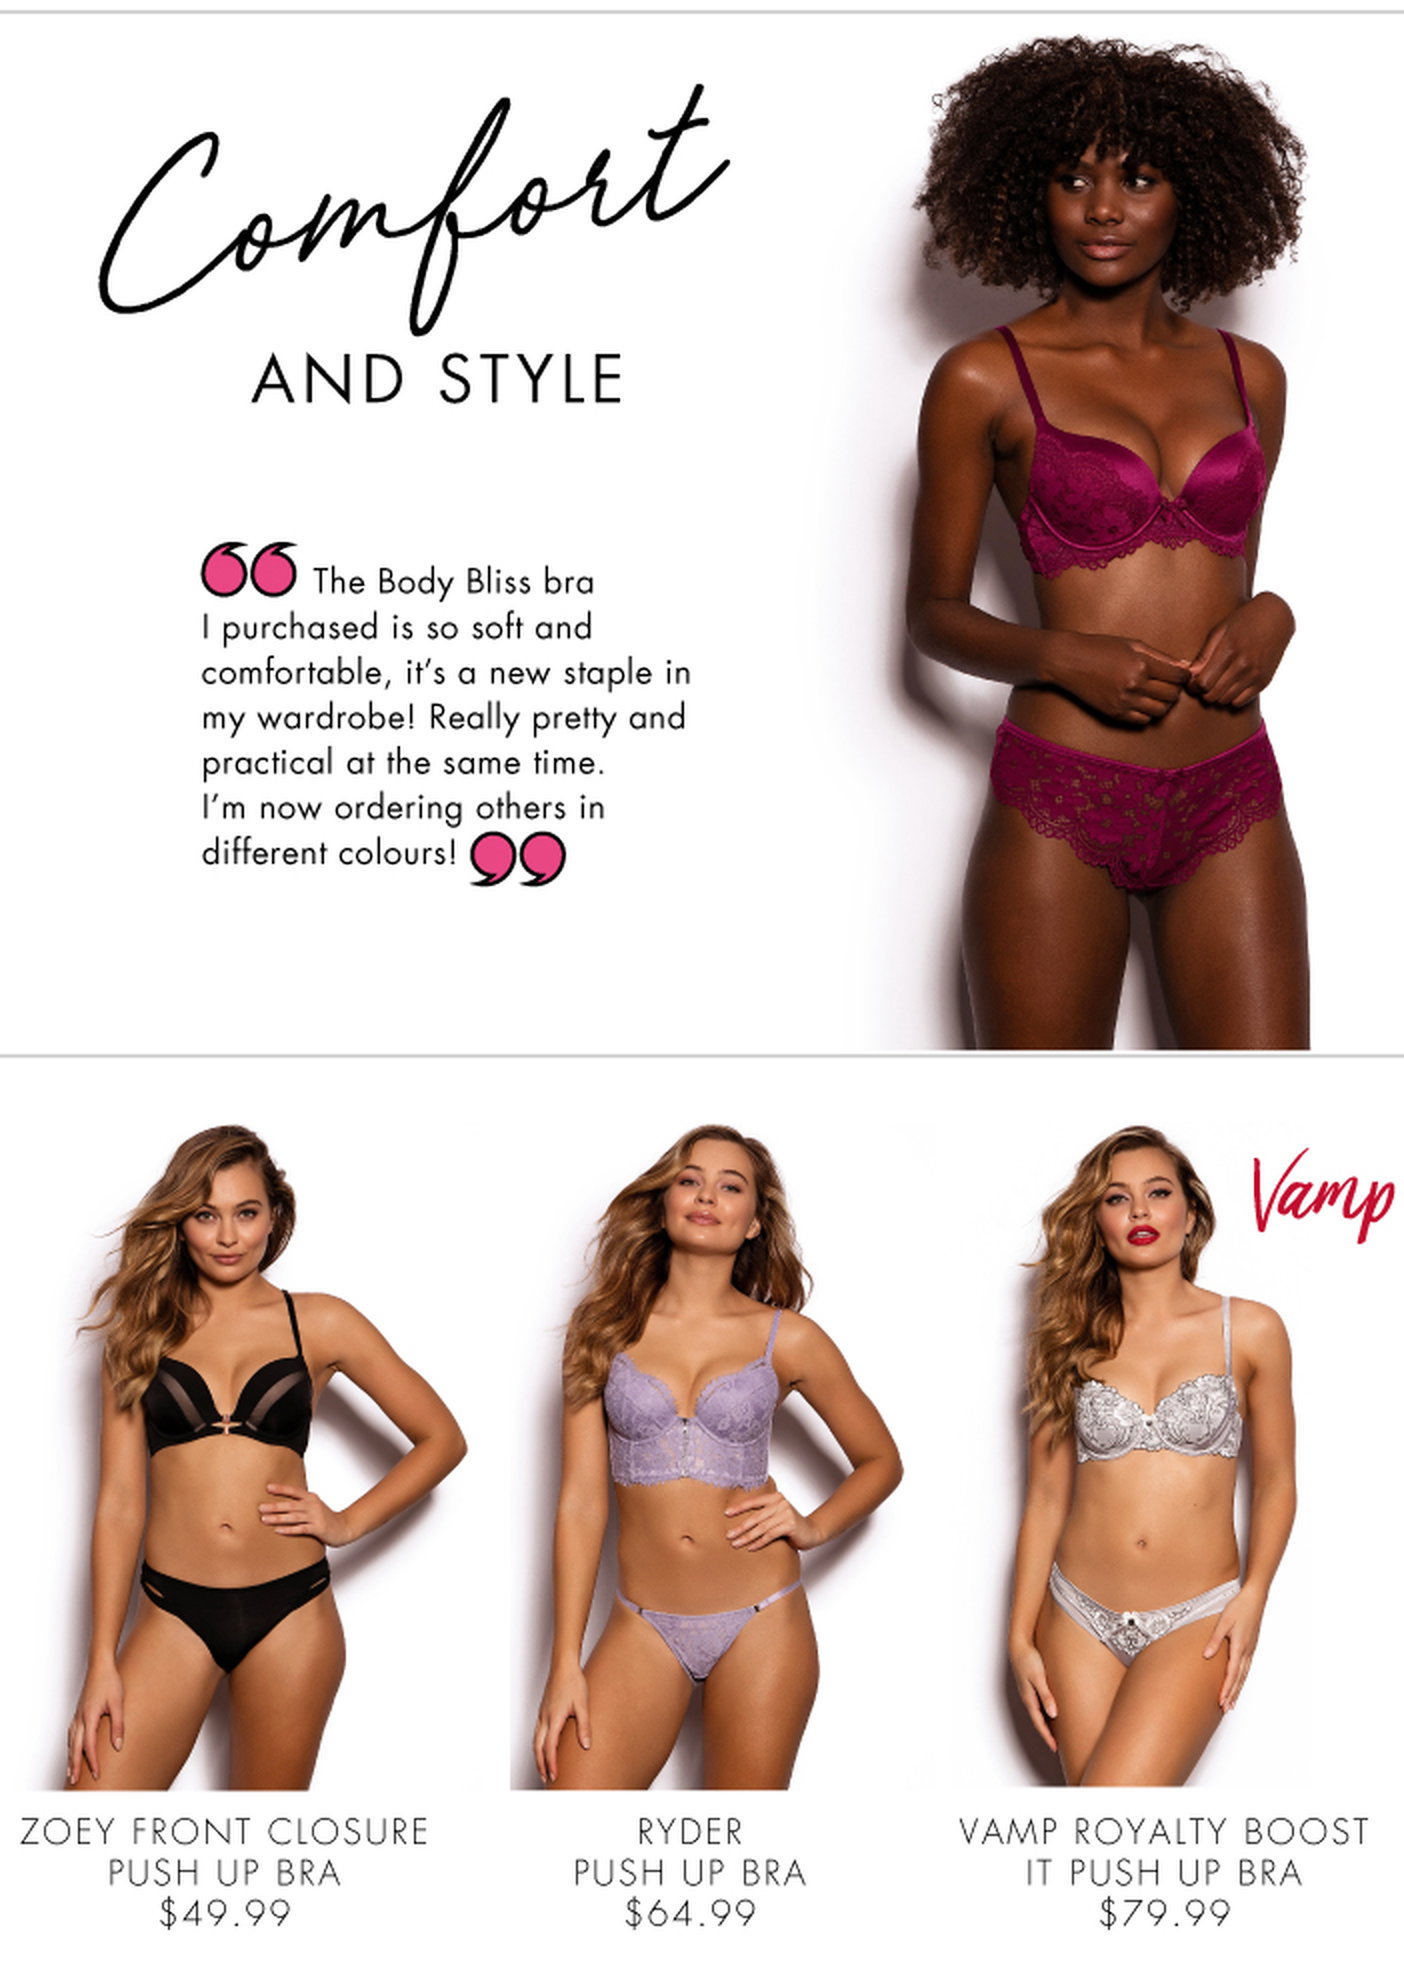 Bras N Things: Don't forget our VIP Offer: Receive $20 Off Your